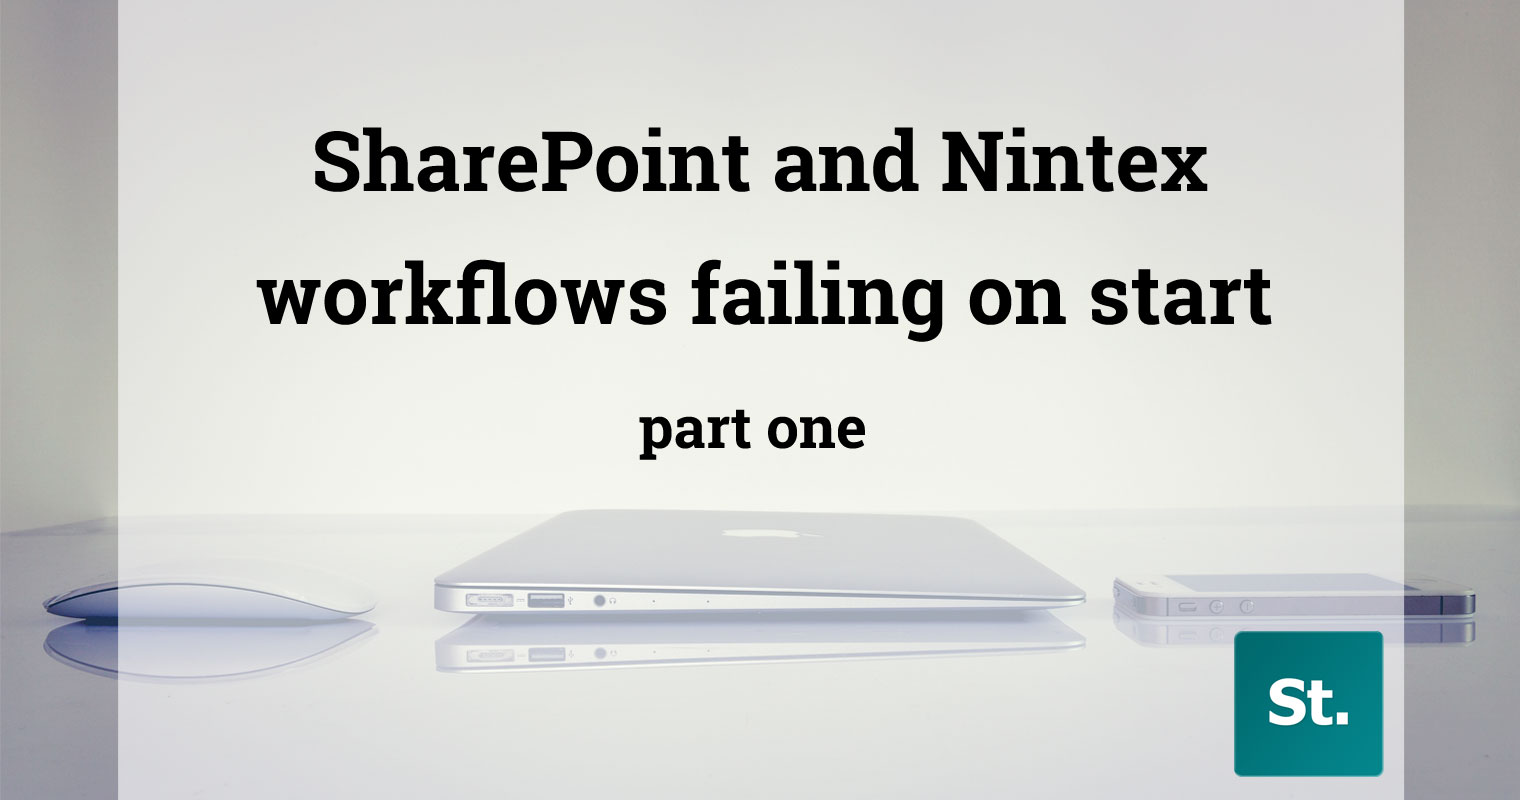 SharePoint and Nintex workflows failing on start after .NET security update